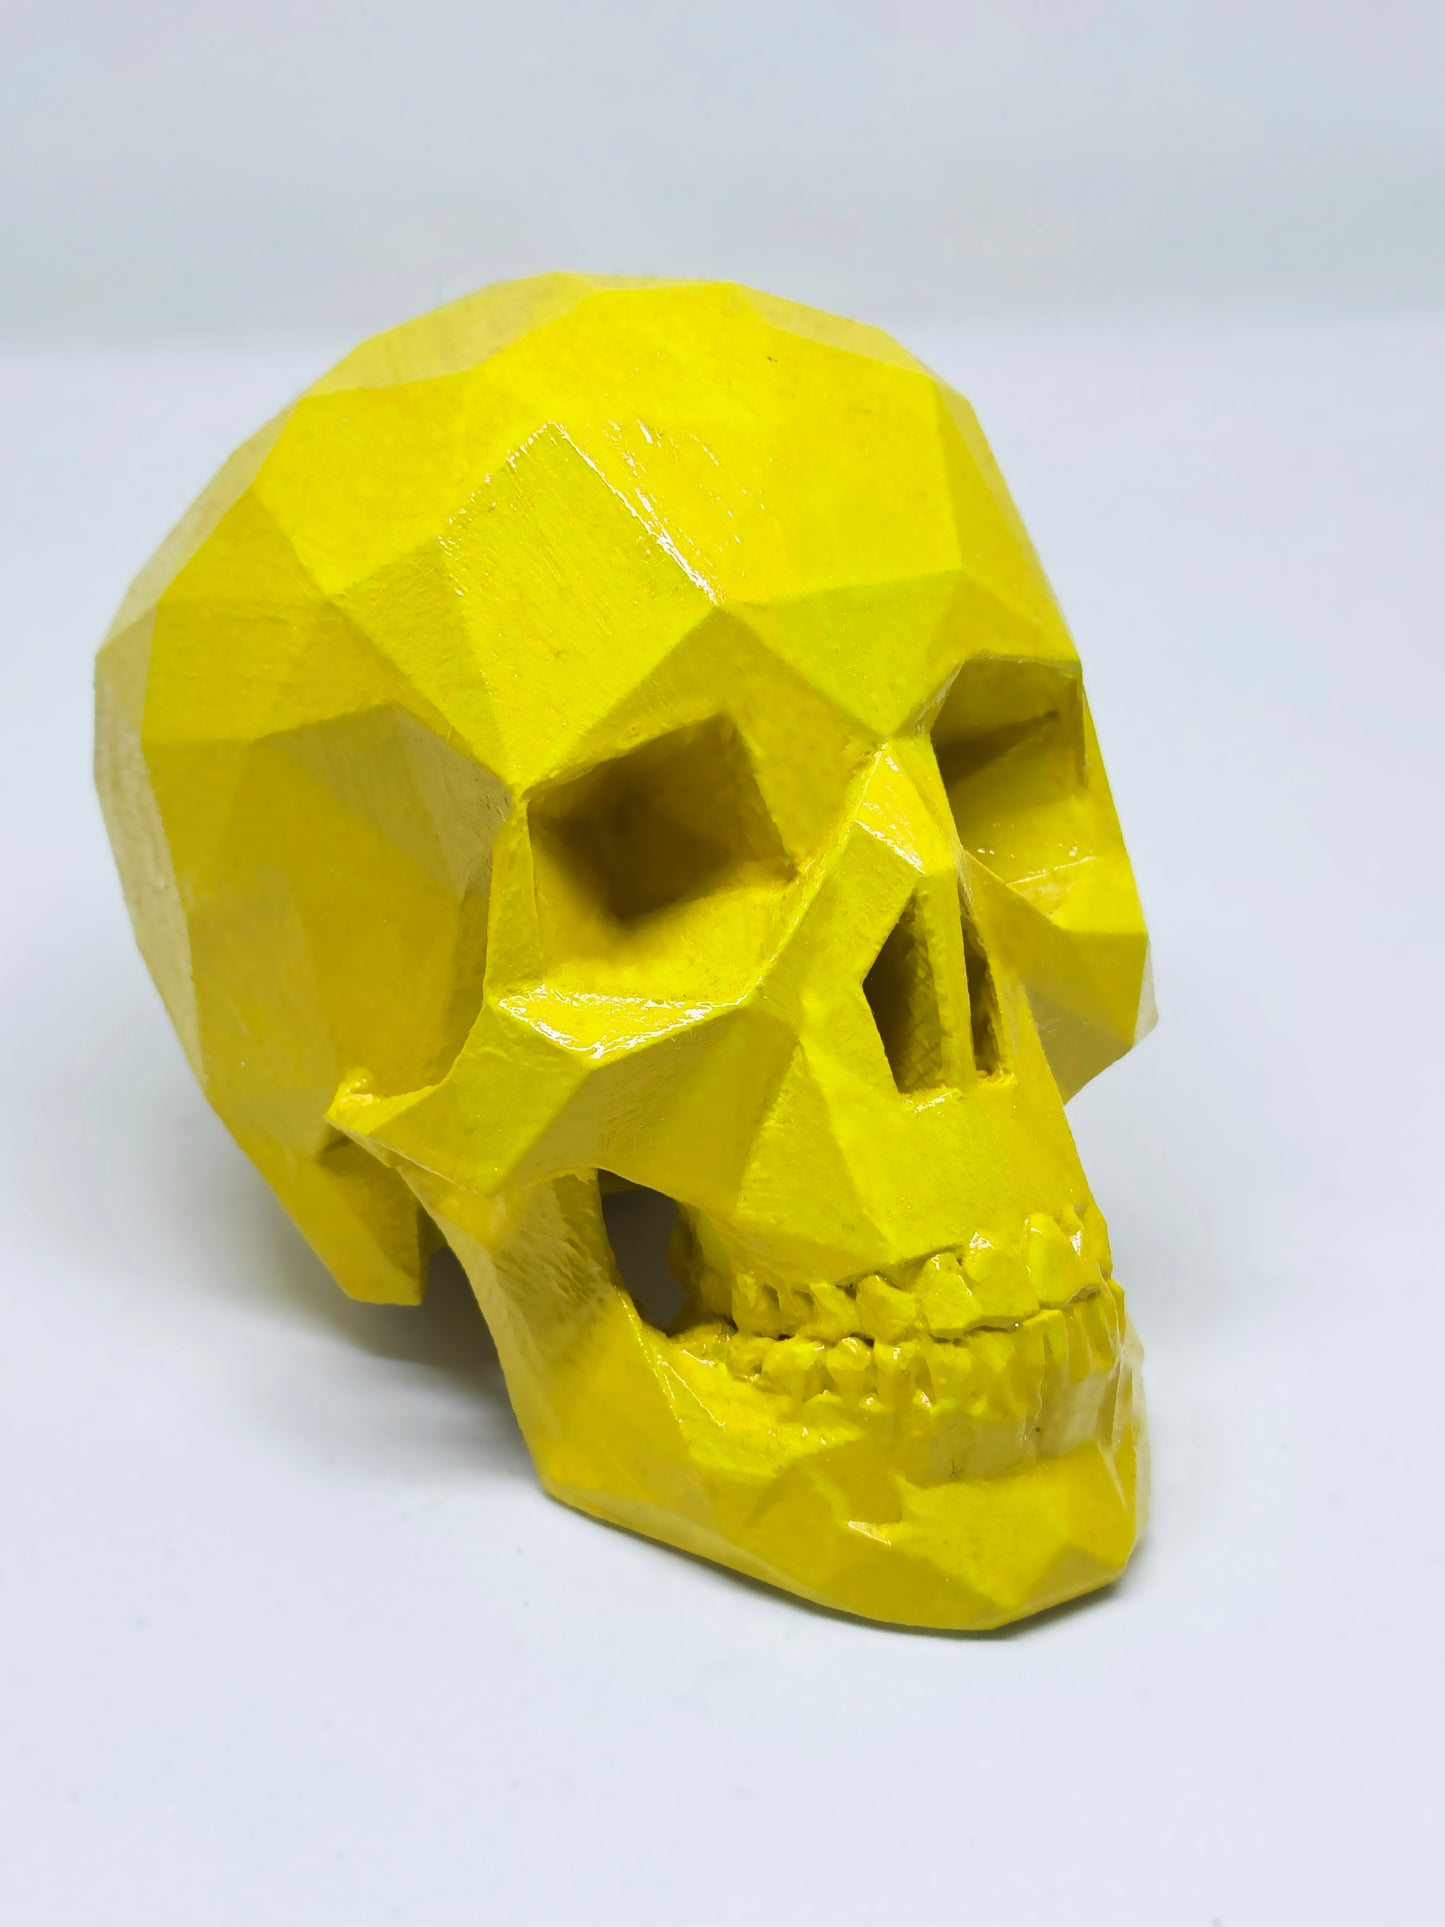 NEON YELLOW AFTERLIFE SKULL - 3D PRINTED SCULPTURE (1/13)